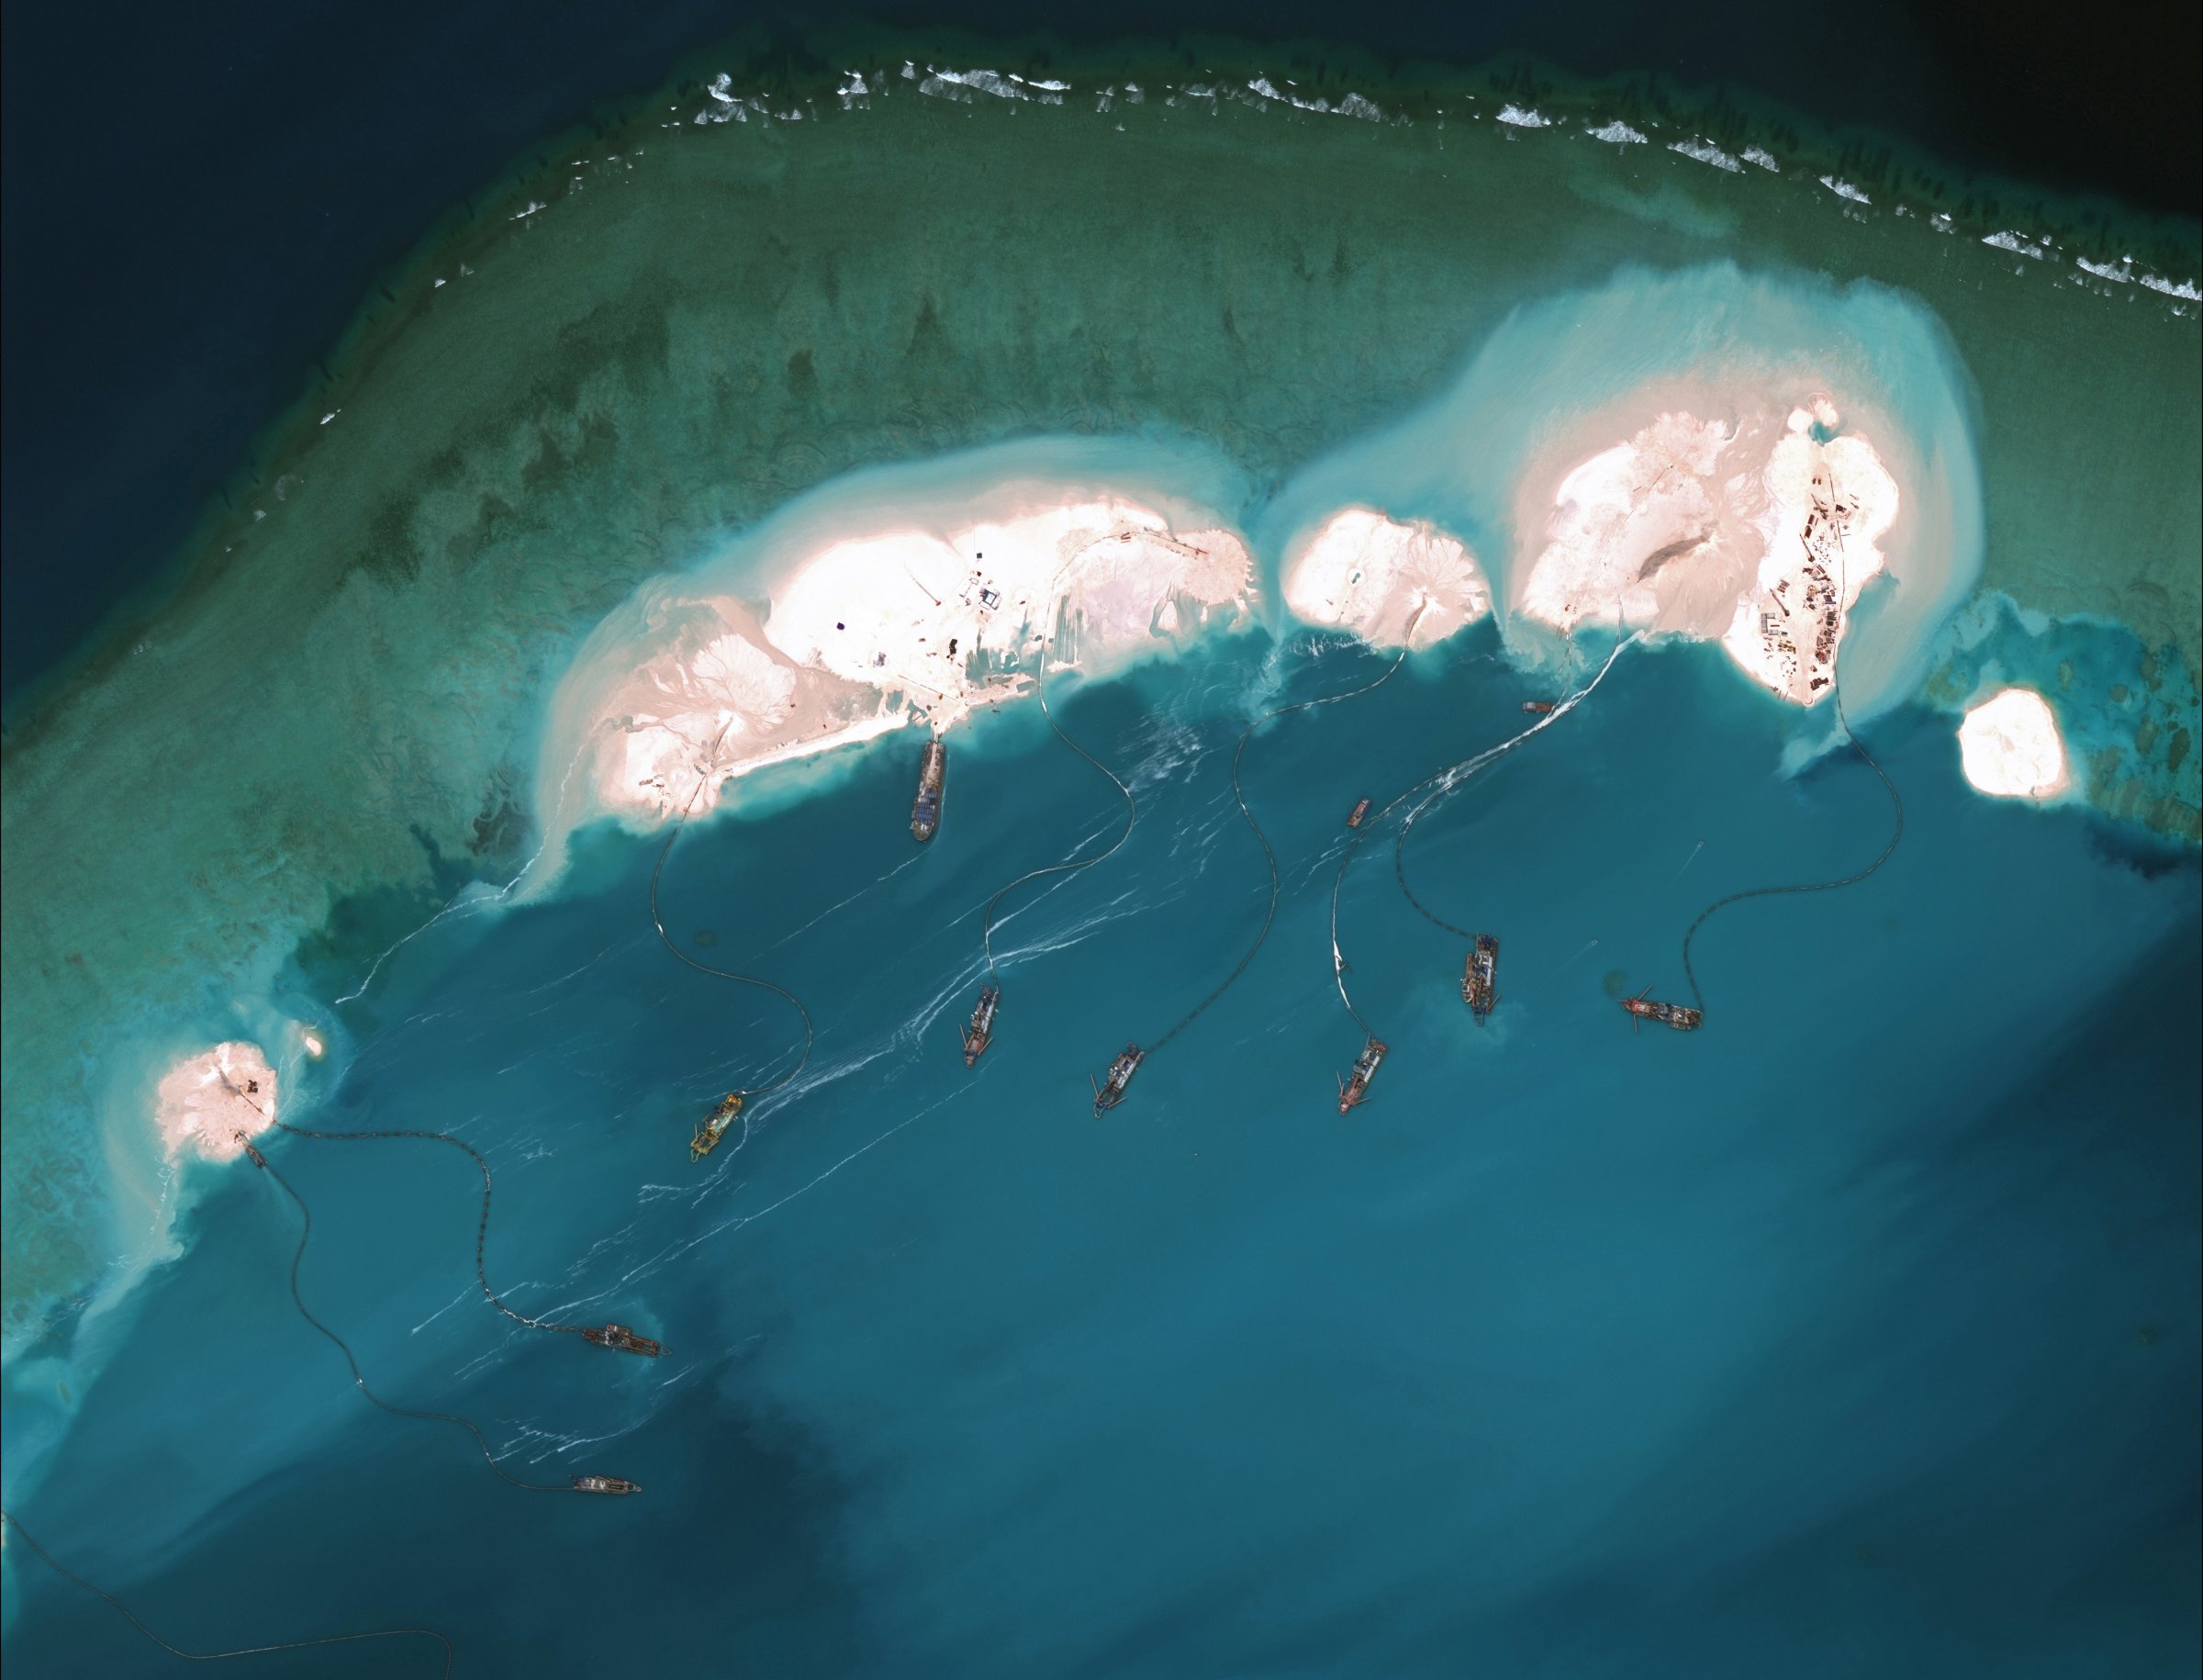 DigitalGlobe imagery from 16 March 2015 shows significant construction and dredging underway at Mischief Reef. New structures, fortified seawalls, and construction equipment are present at multiple sites.